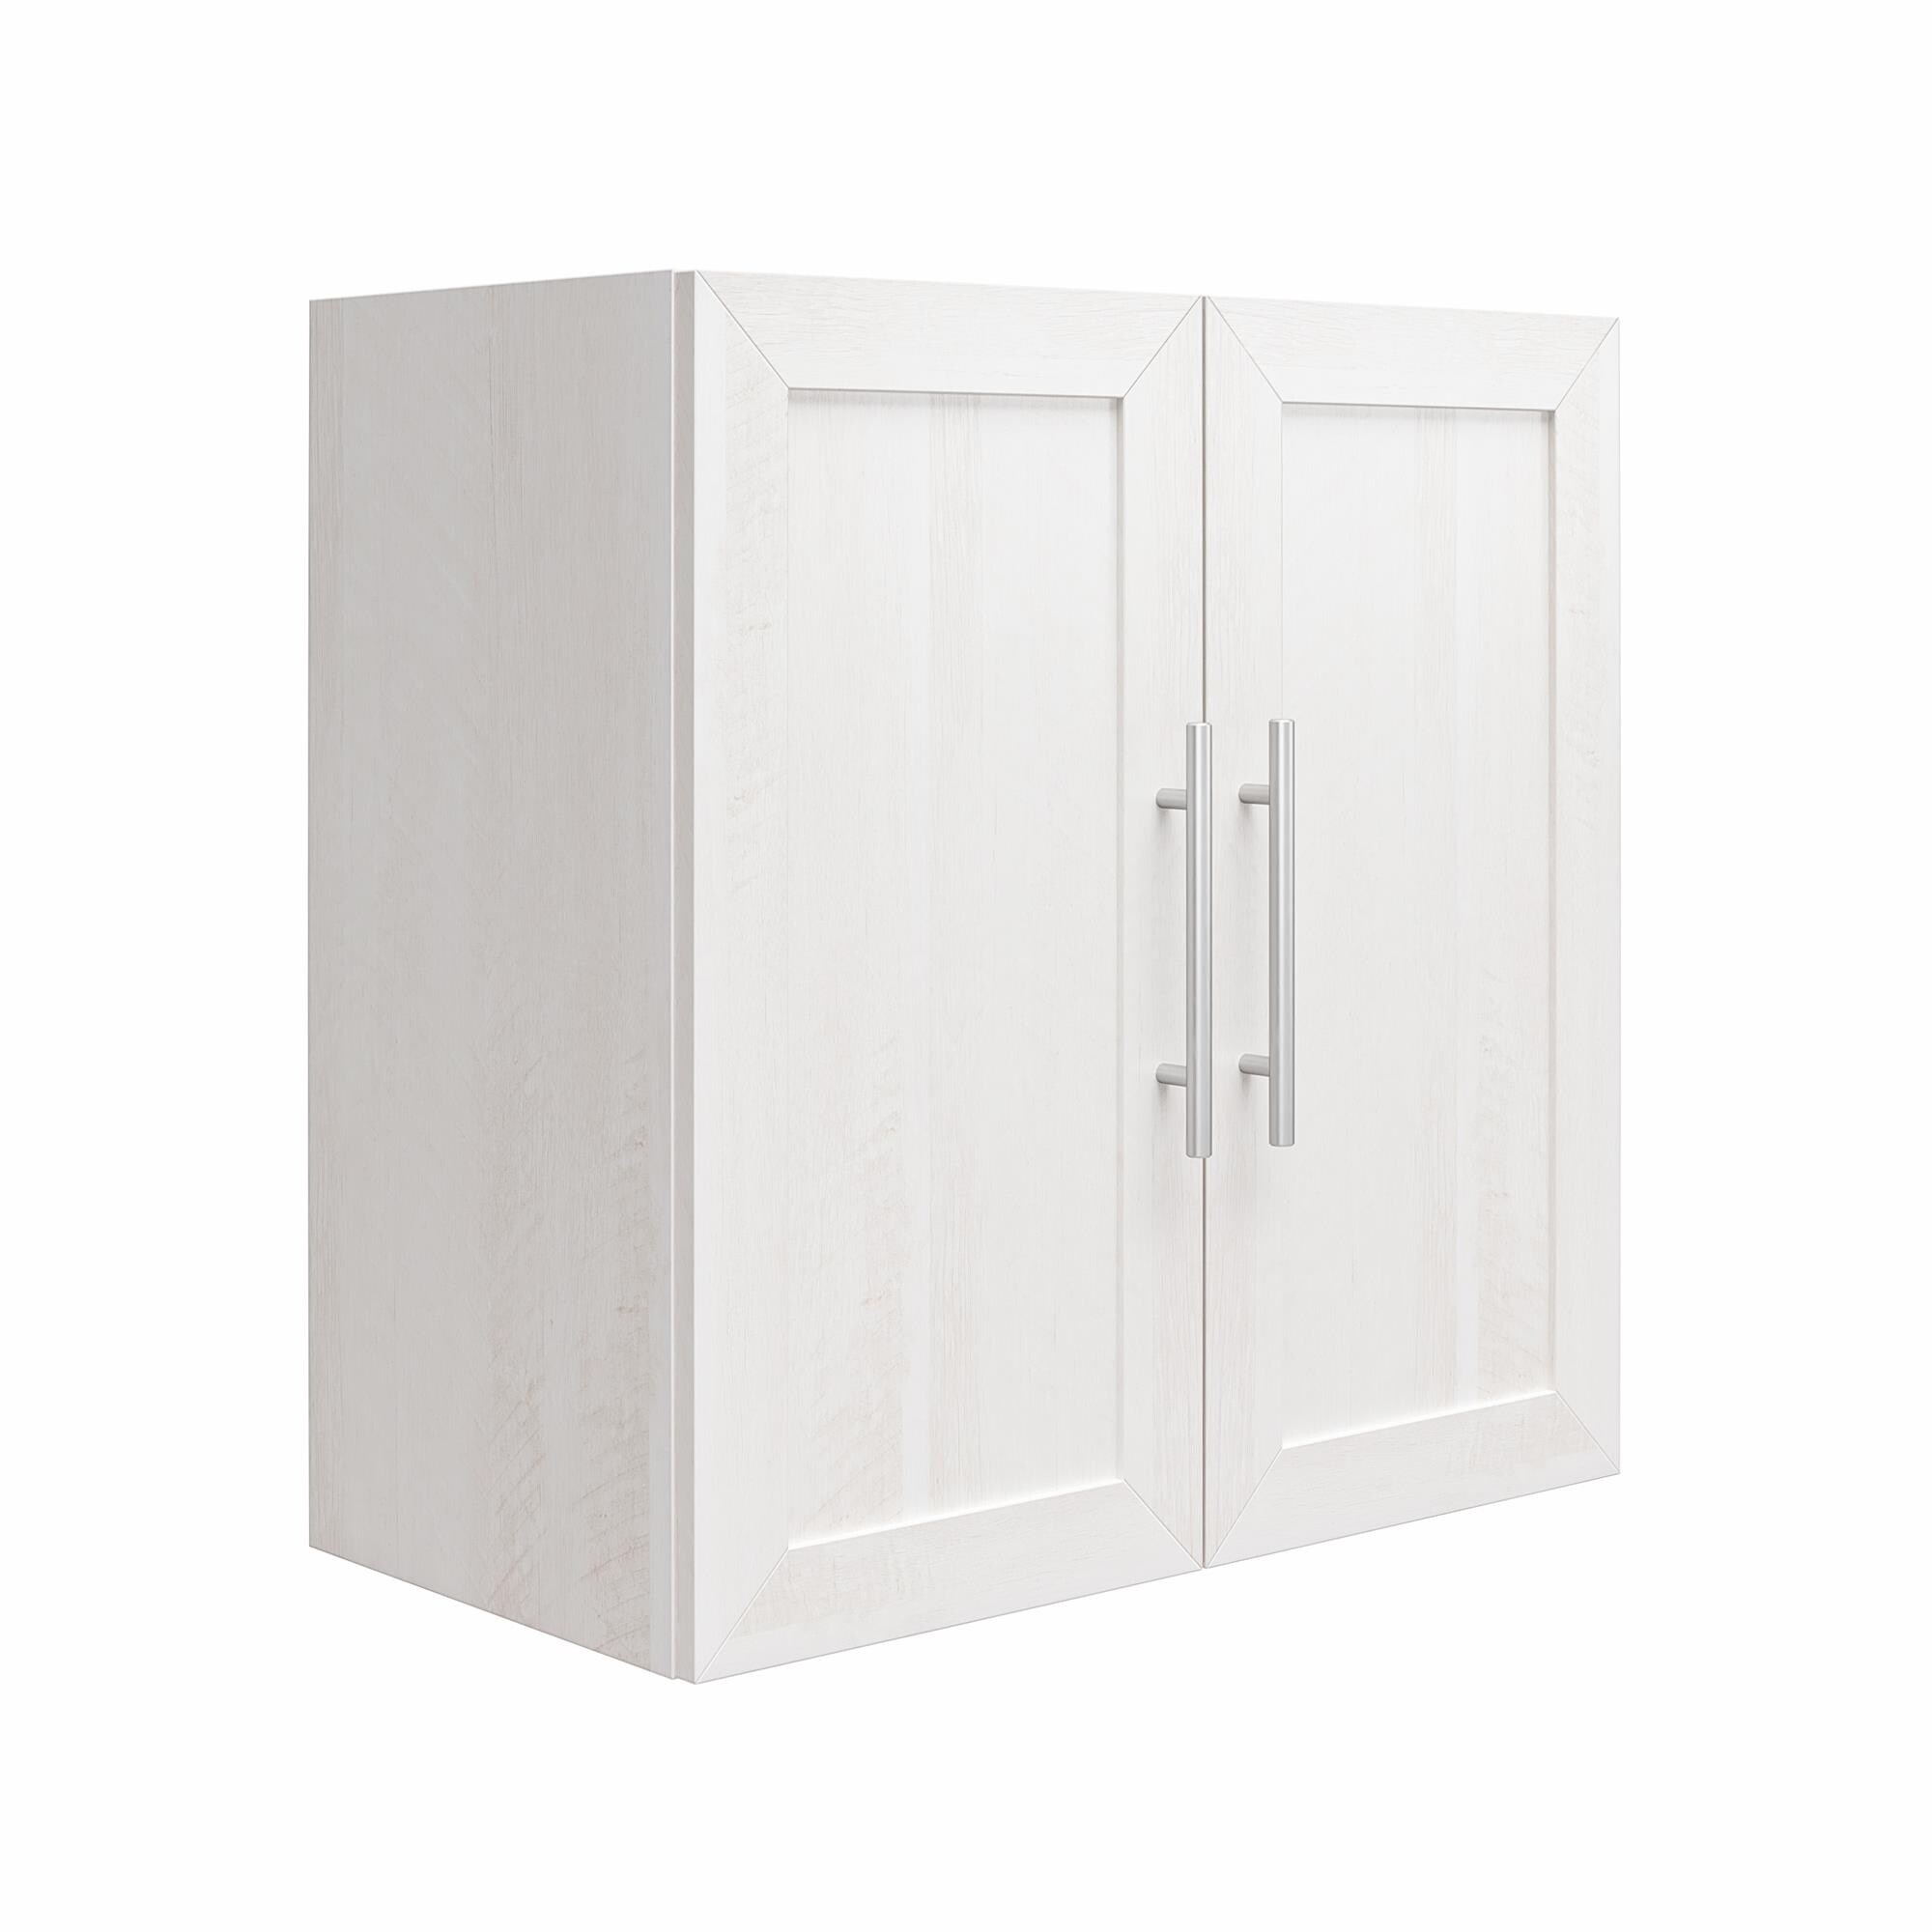 https://ak1.ostkcdn.com/images/products/is/images/direct/959c66ffb86d1ec60734ca2074b7cddea4b0b38c/Systembuild-Evolution-Camberly-Framed-24-inch-Wall-Cabinet.jpg